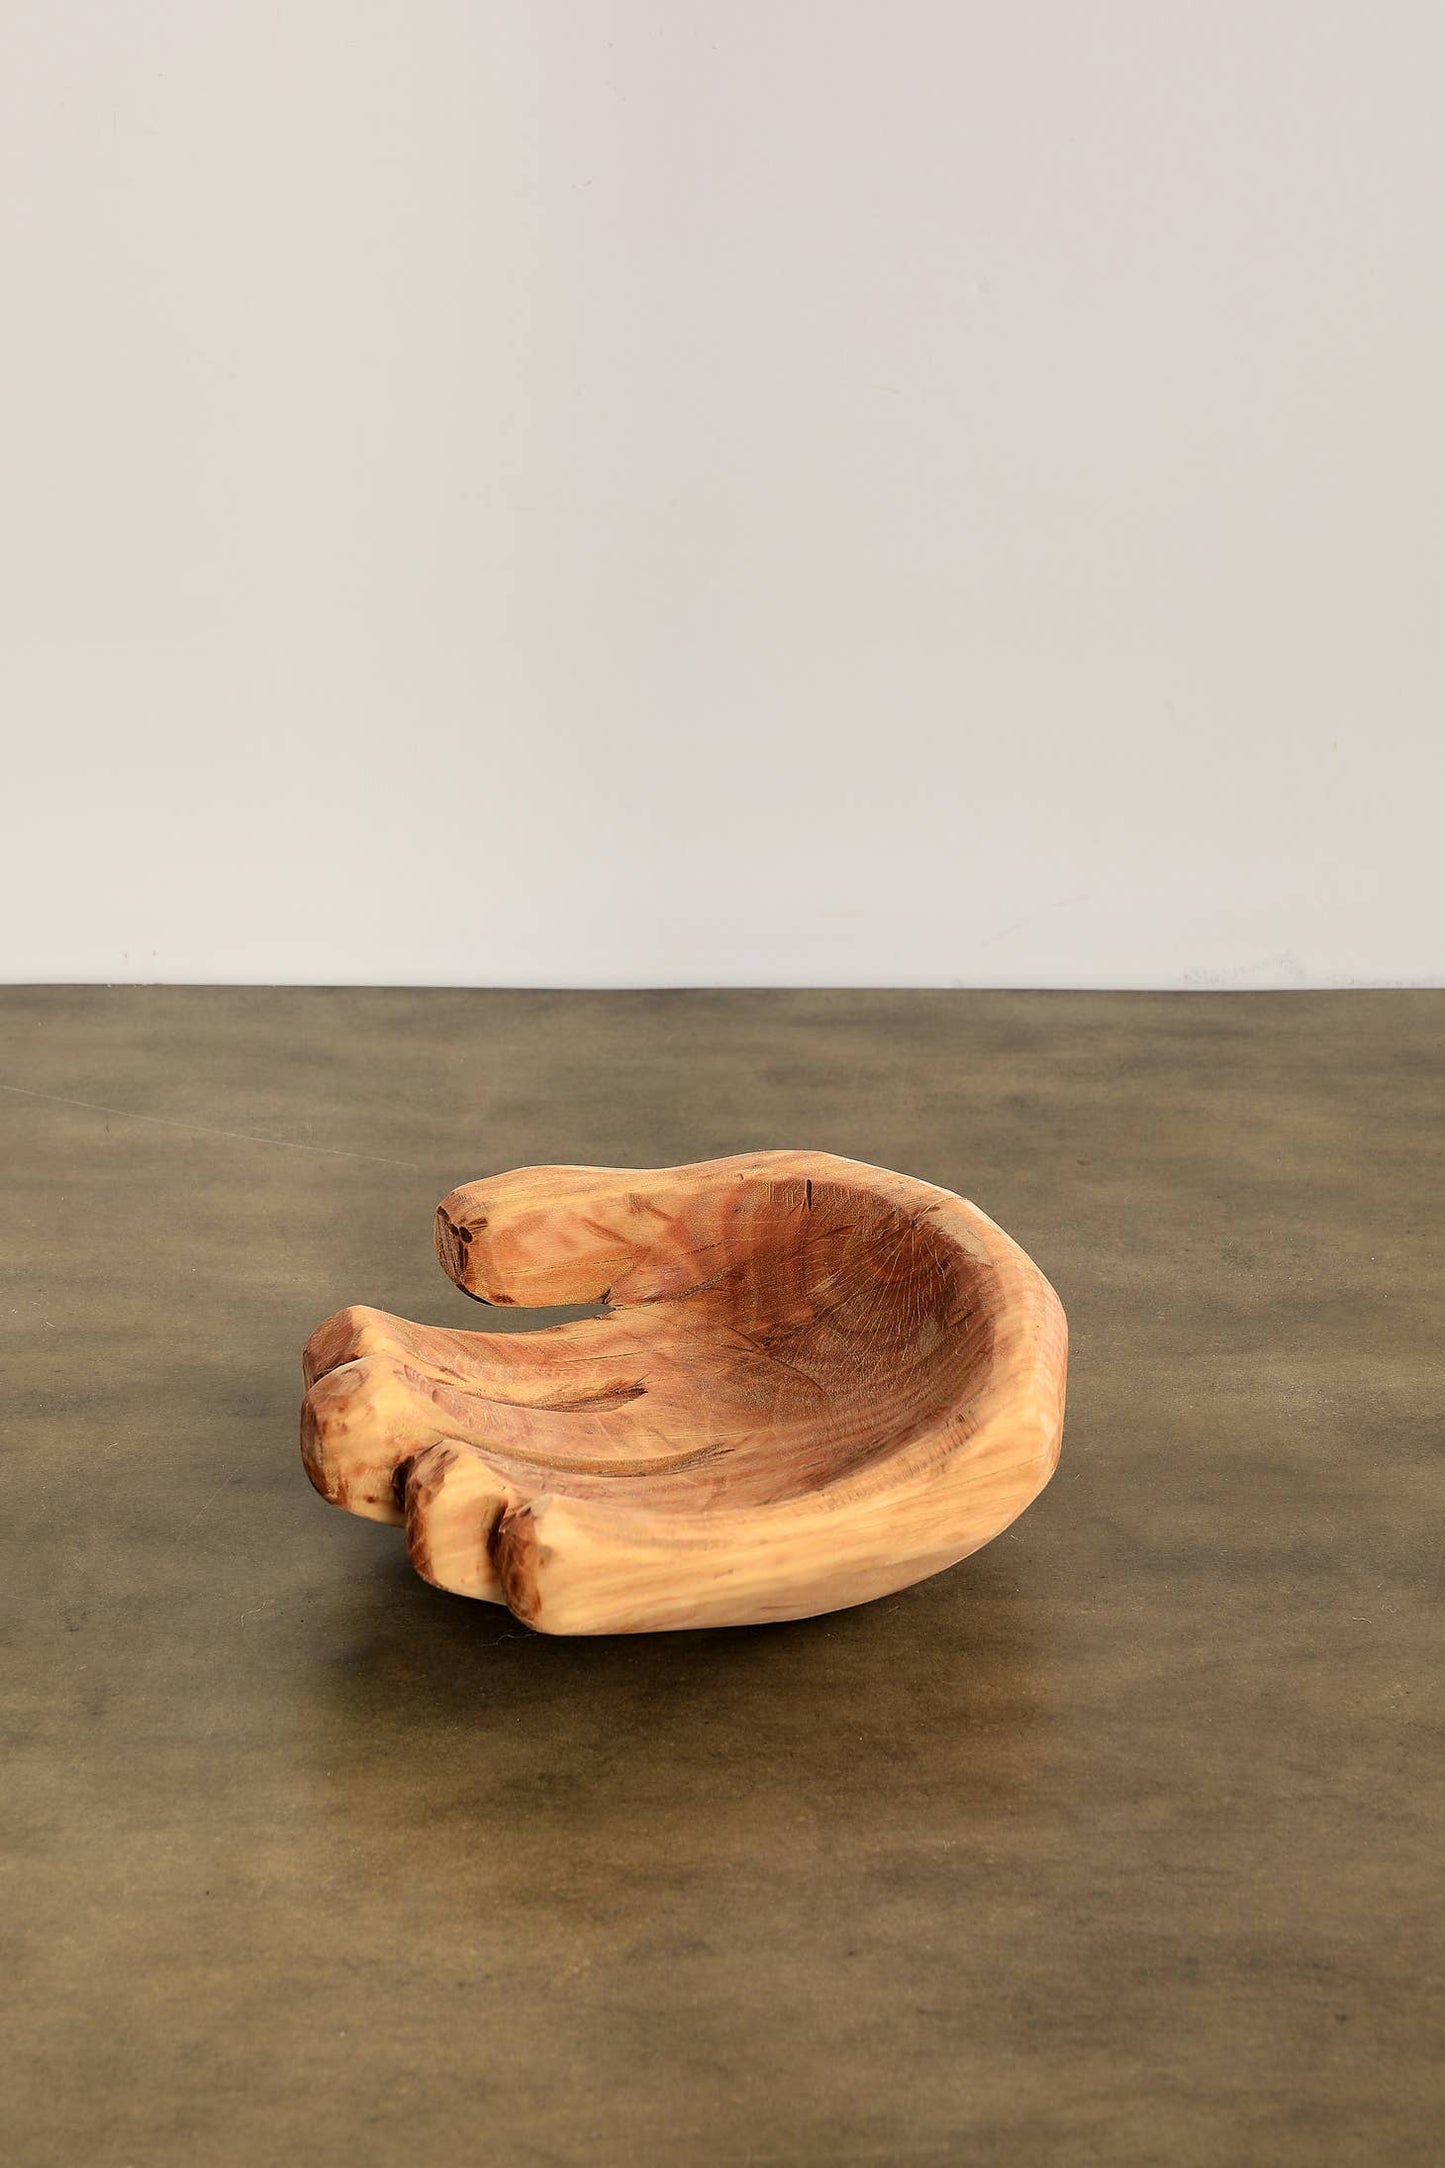 An elegant wood bowl hand-carved in South Africa from a single piece of sustainably sourced Blue Gum eucalyptus.